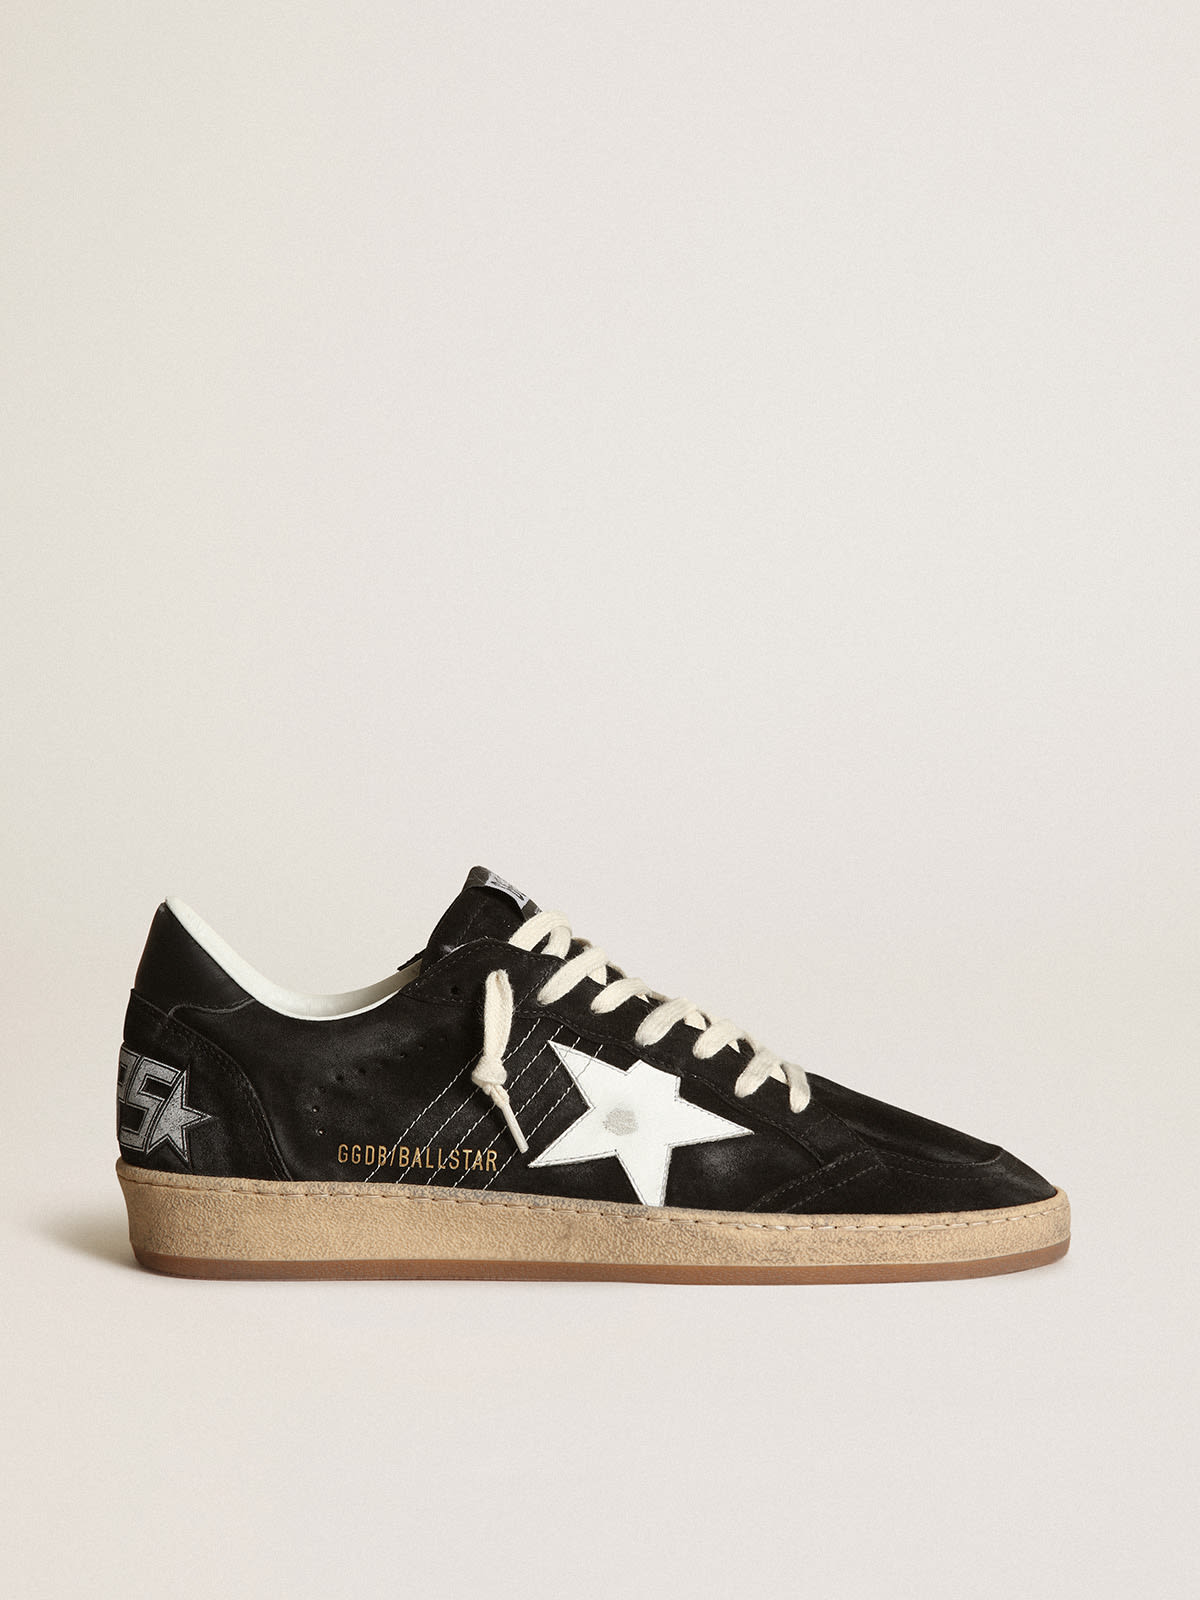 Golden Goose - Women's Ball Star in black suede with white leather star in 